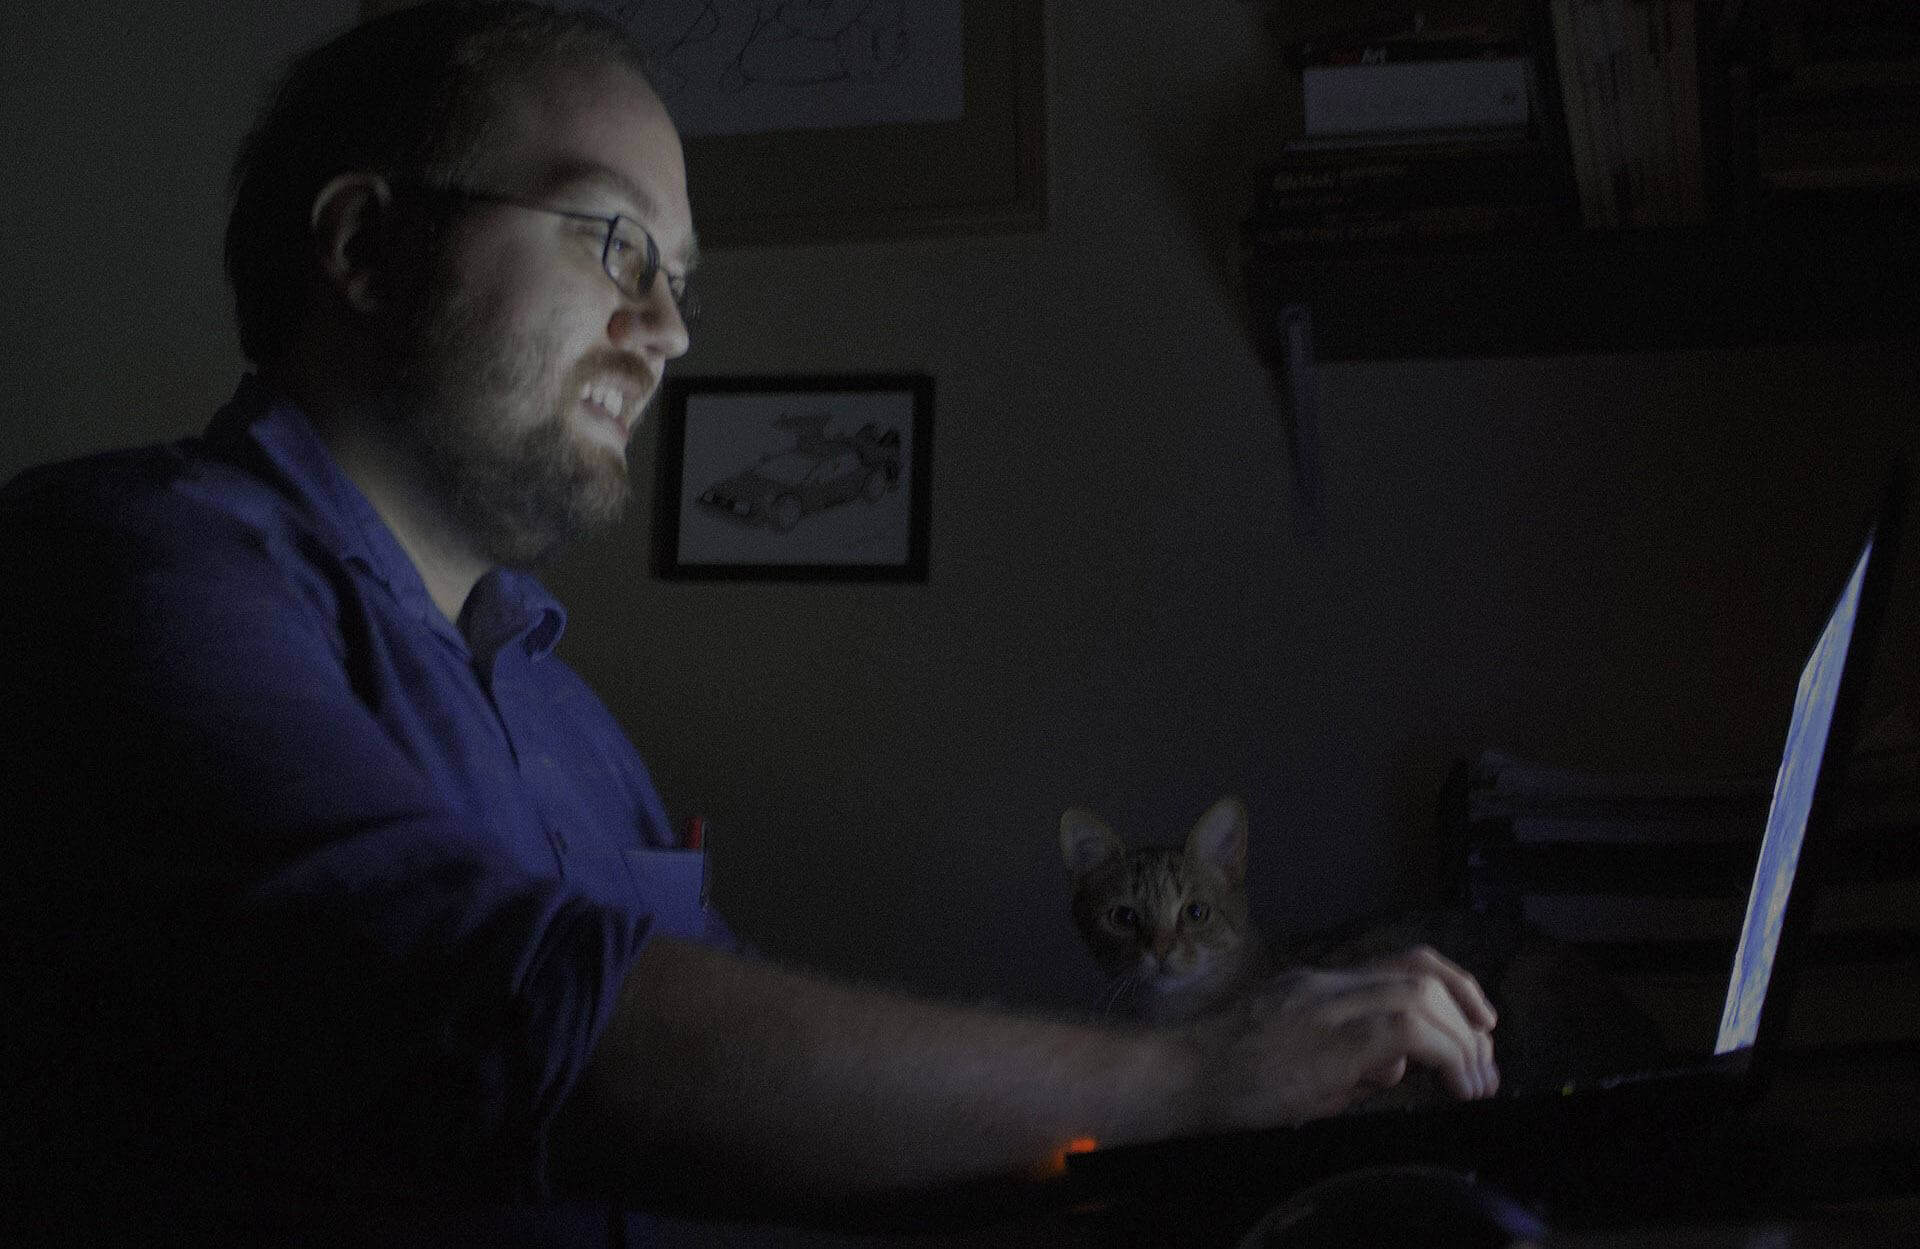 Bearded man with glasses and button-up shirt looking at laptop screen while a kitten is behind him, looking into the camera.